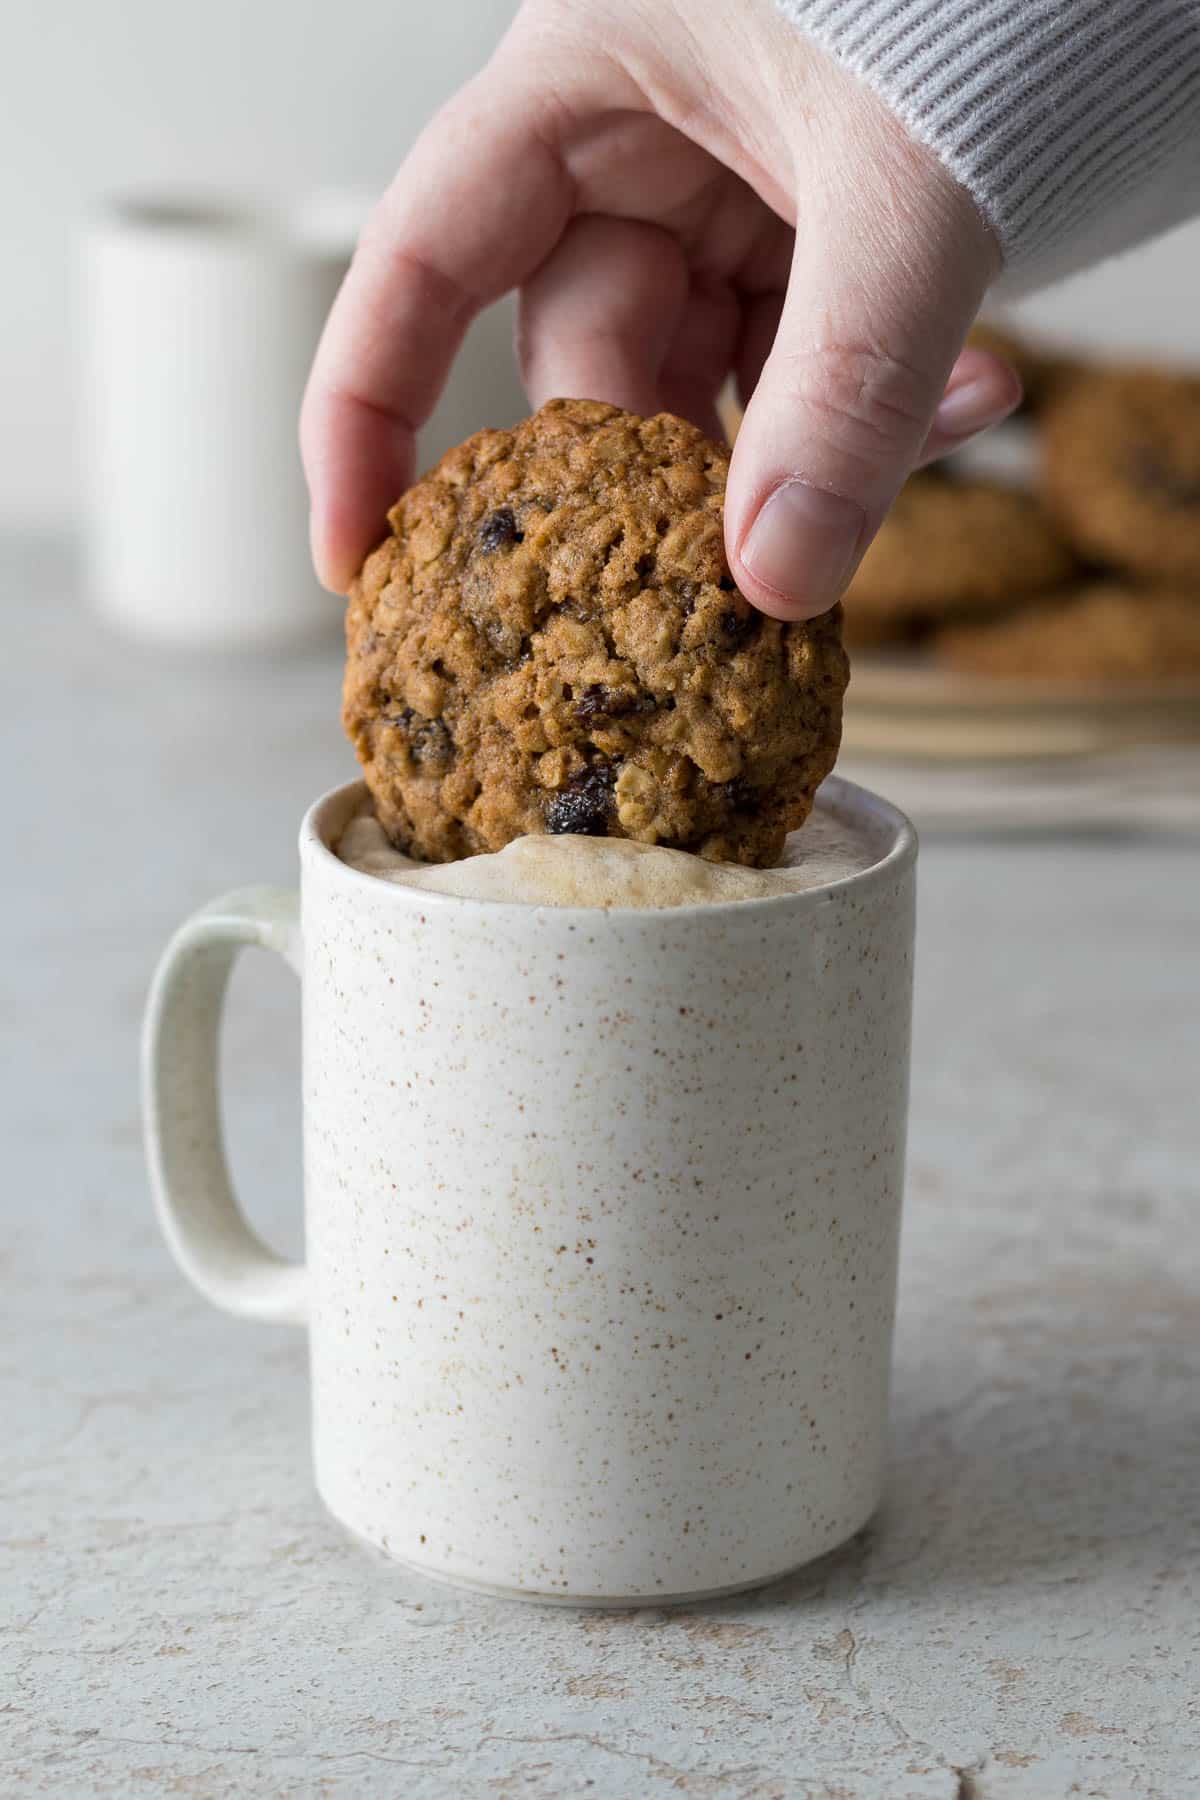 A hand dipping an oatmeal cookie with raisins into a cup of coffee.